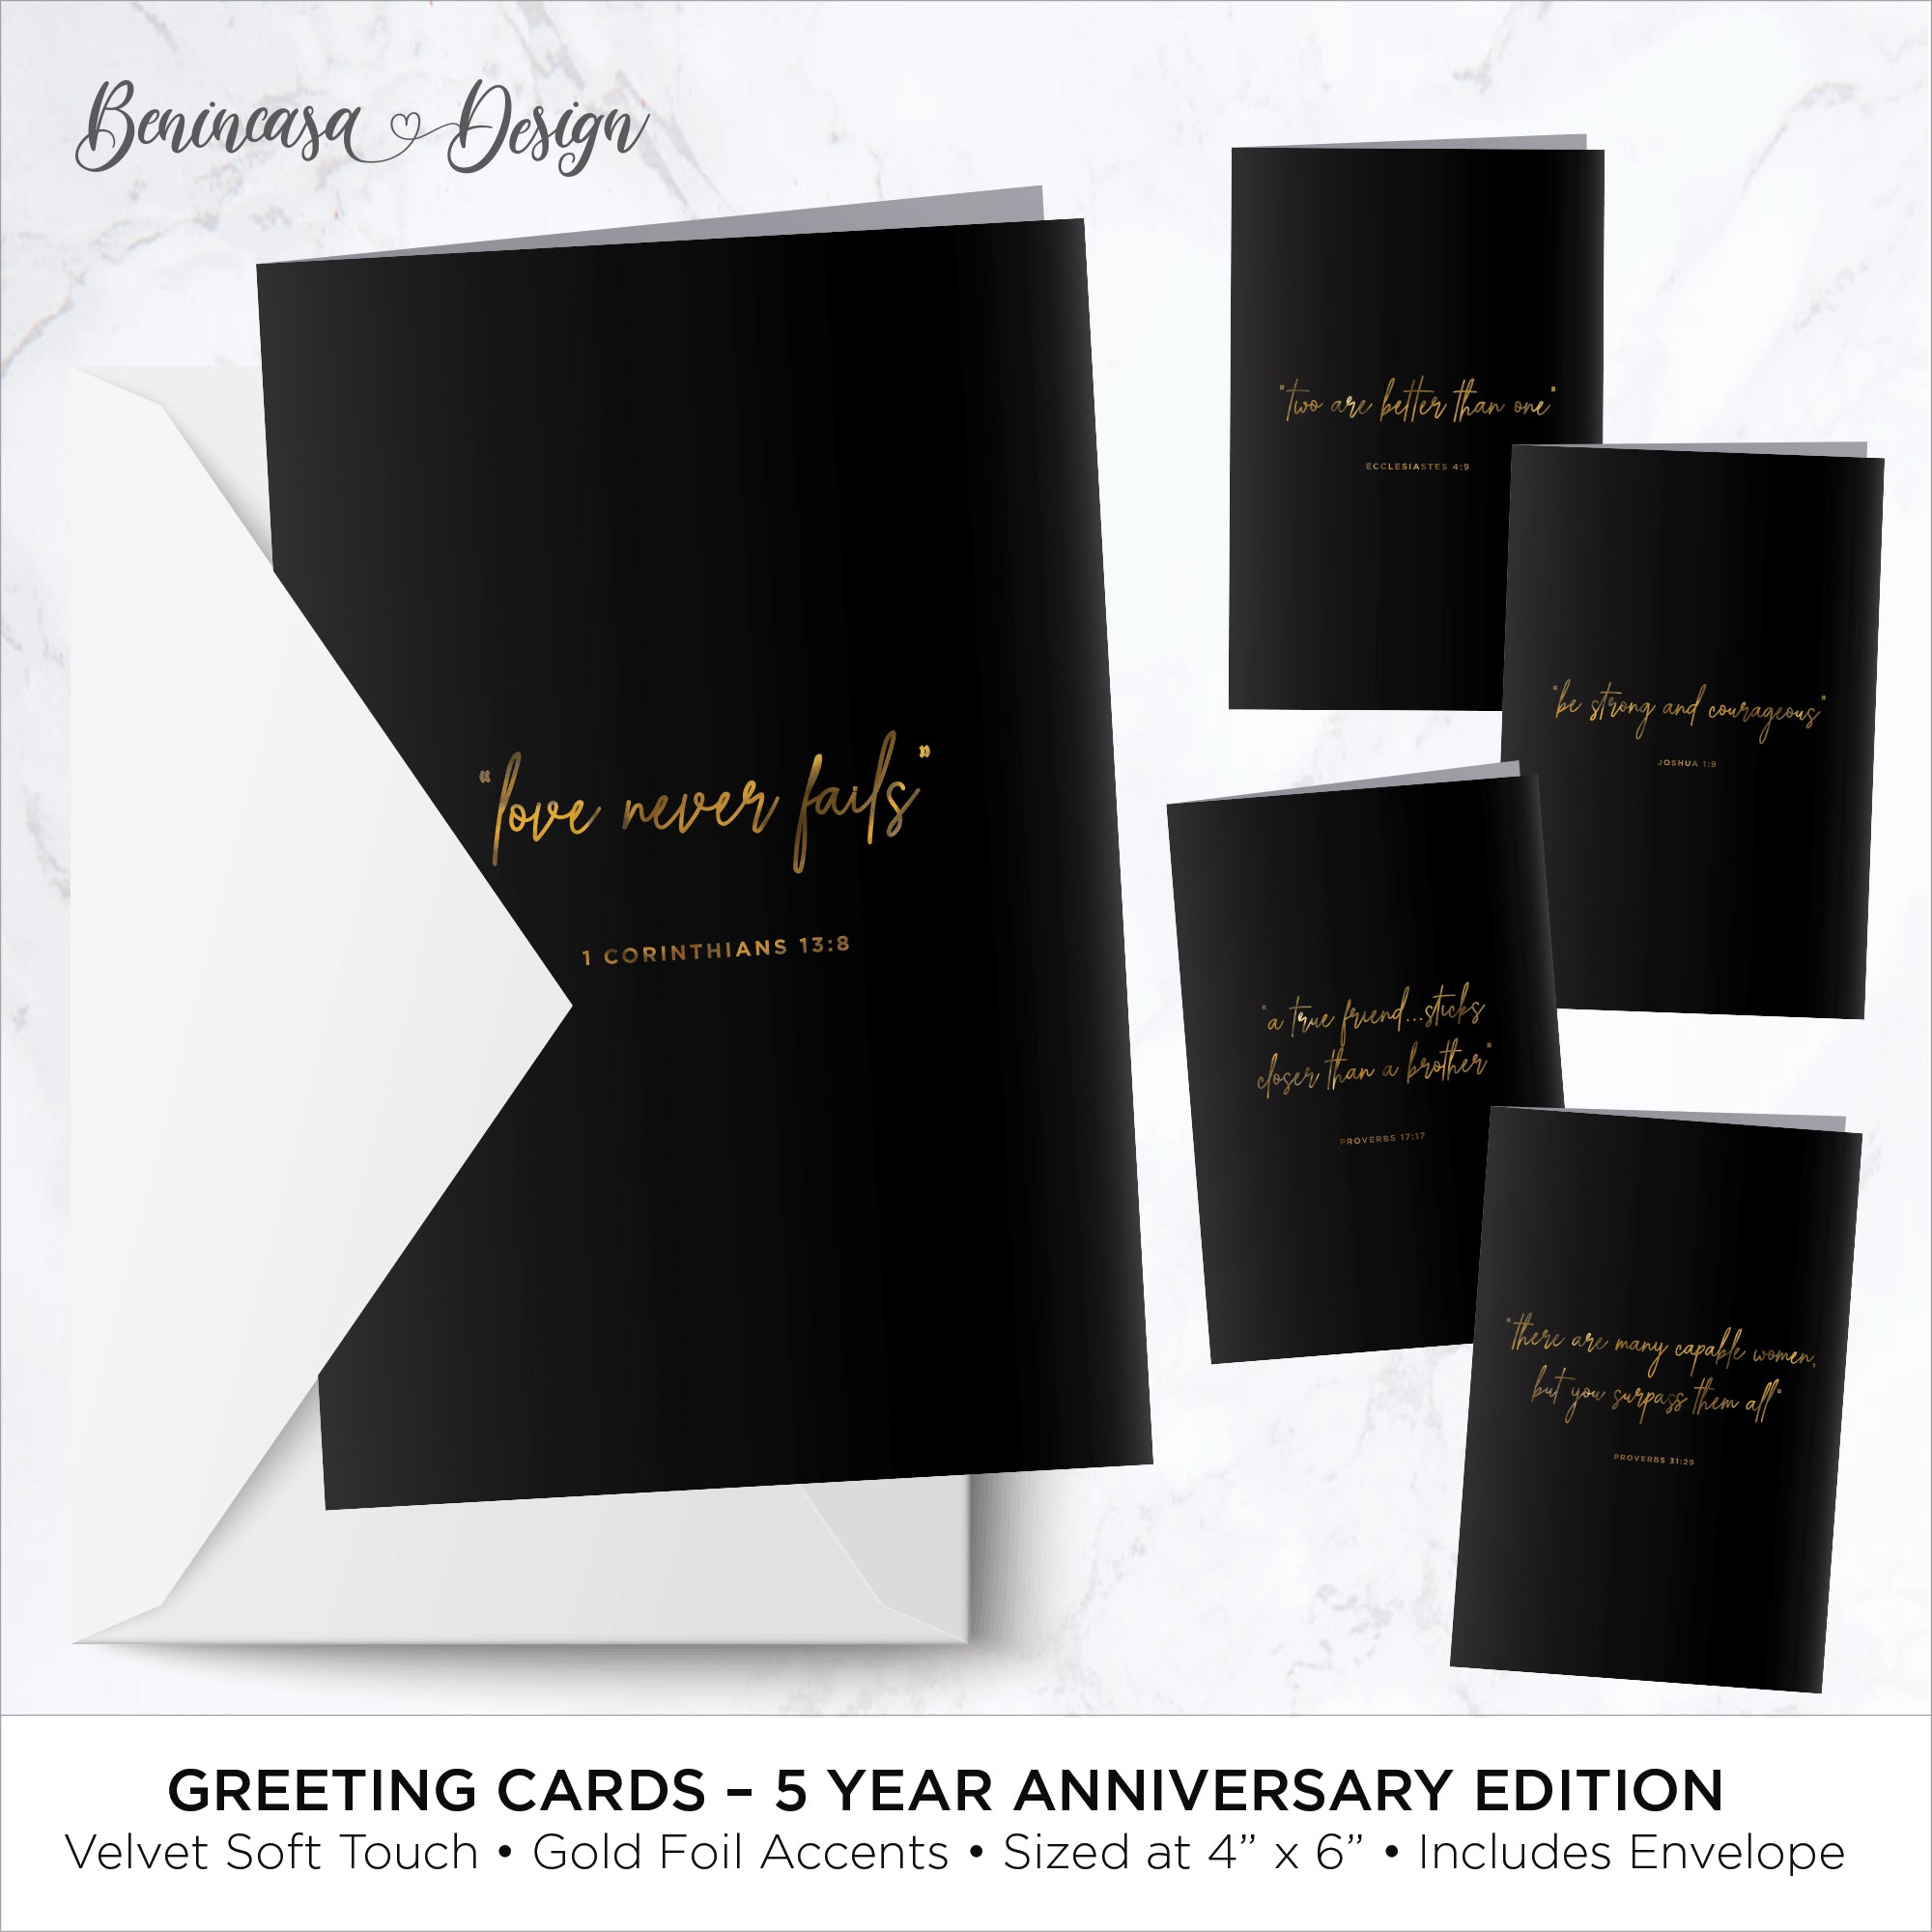 Deluxe Soft Touch Greeting Card (5 Year Anniversary Edition)